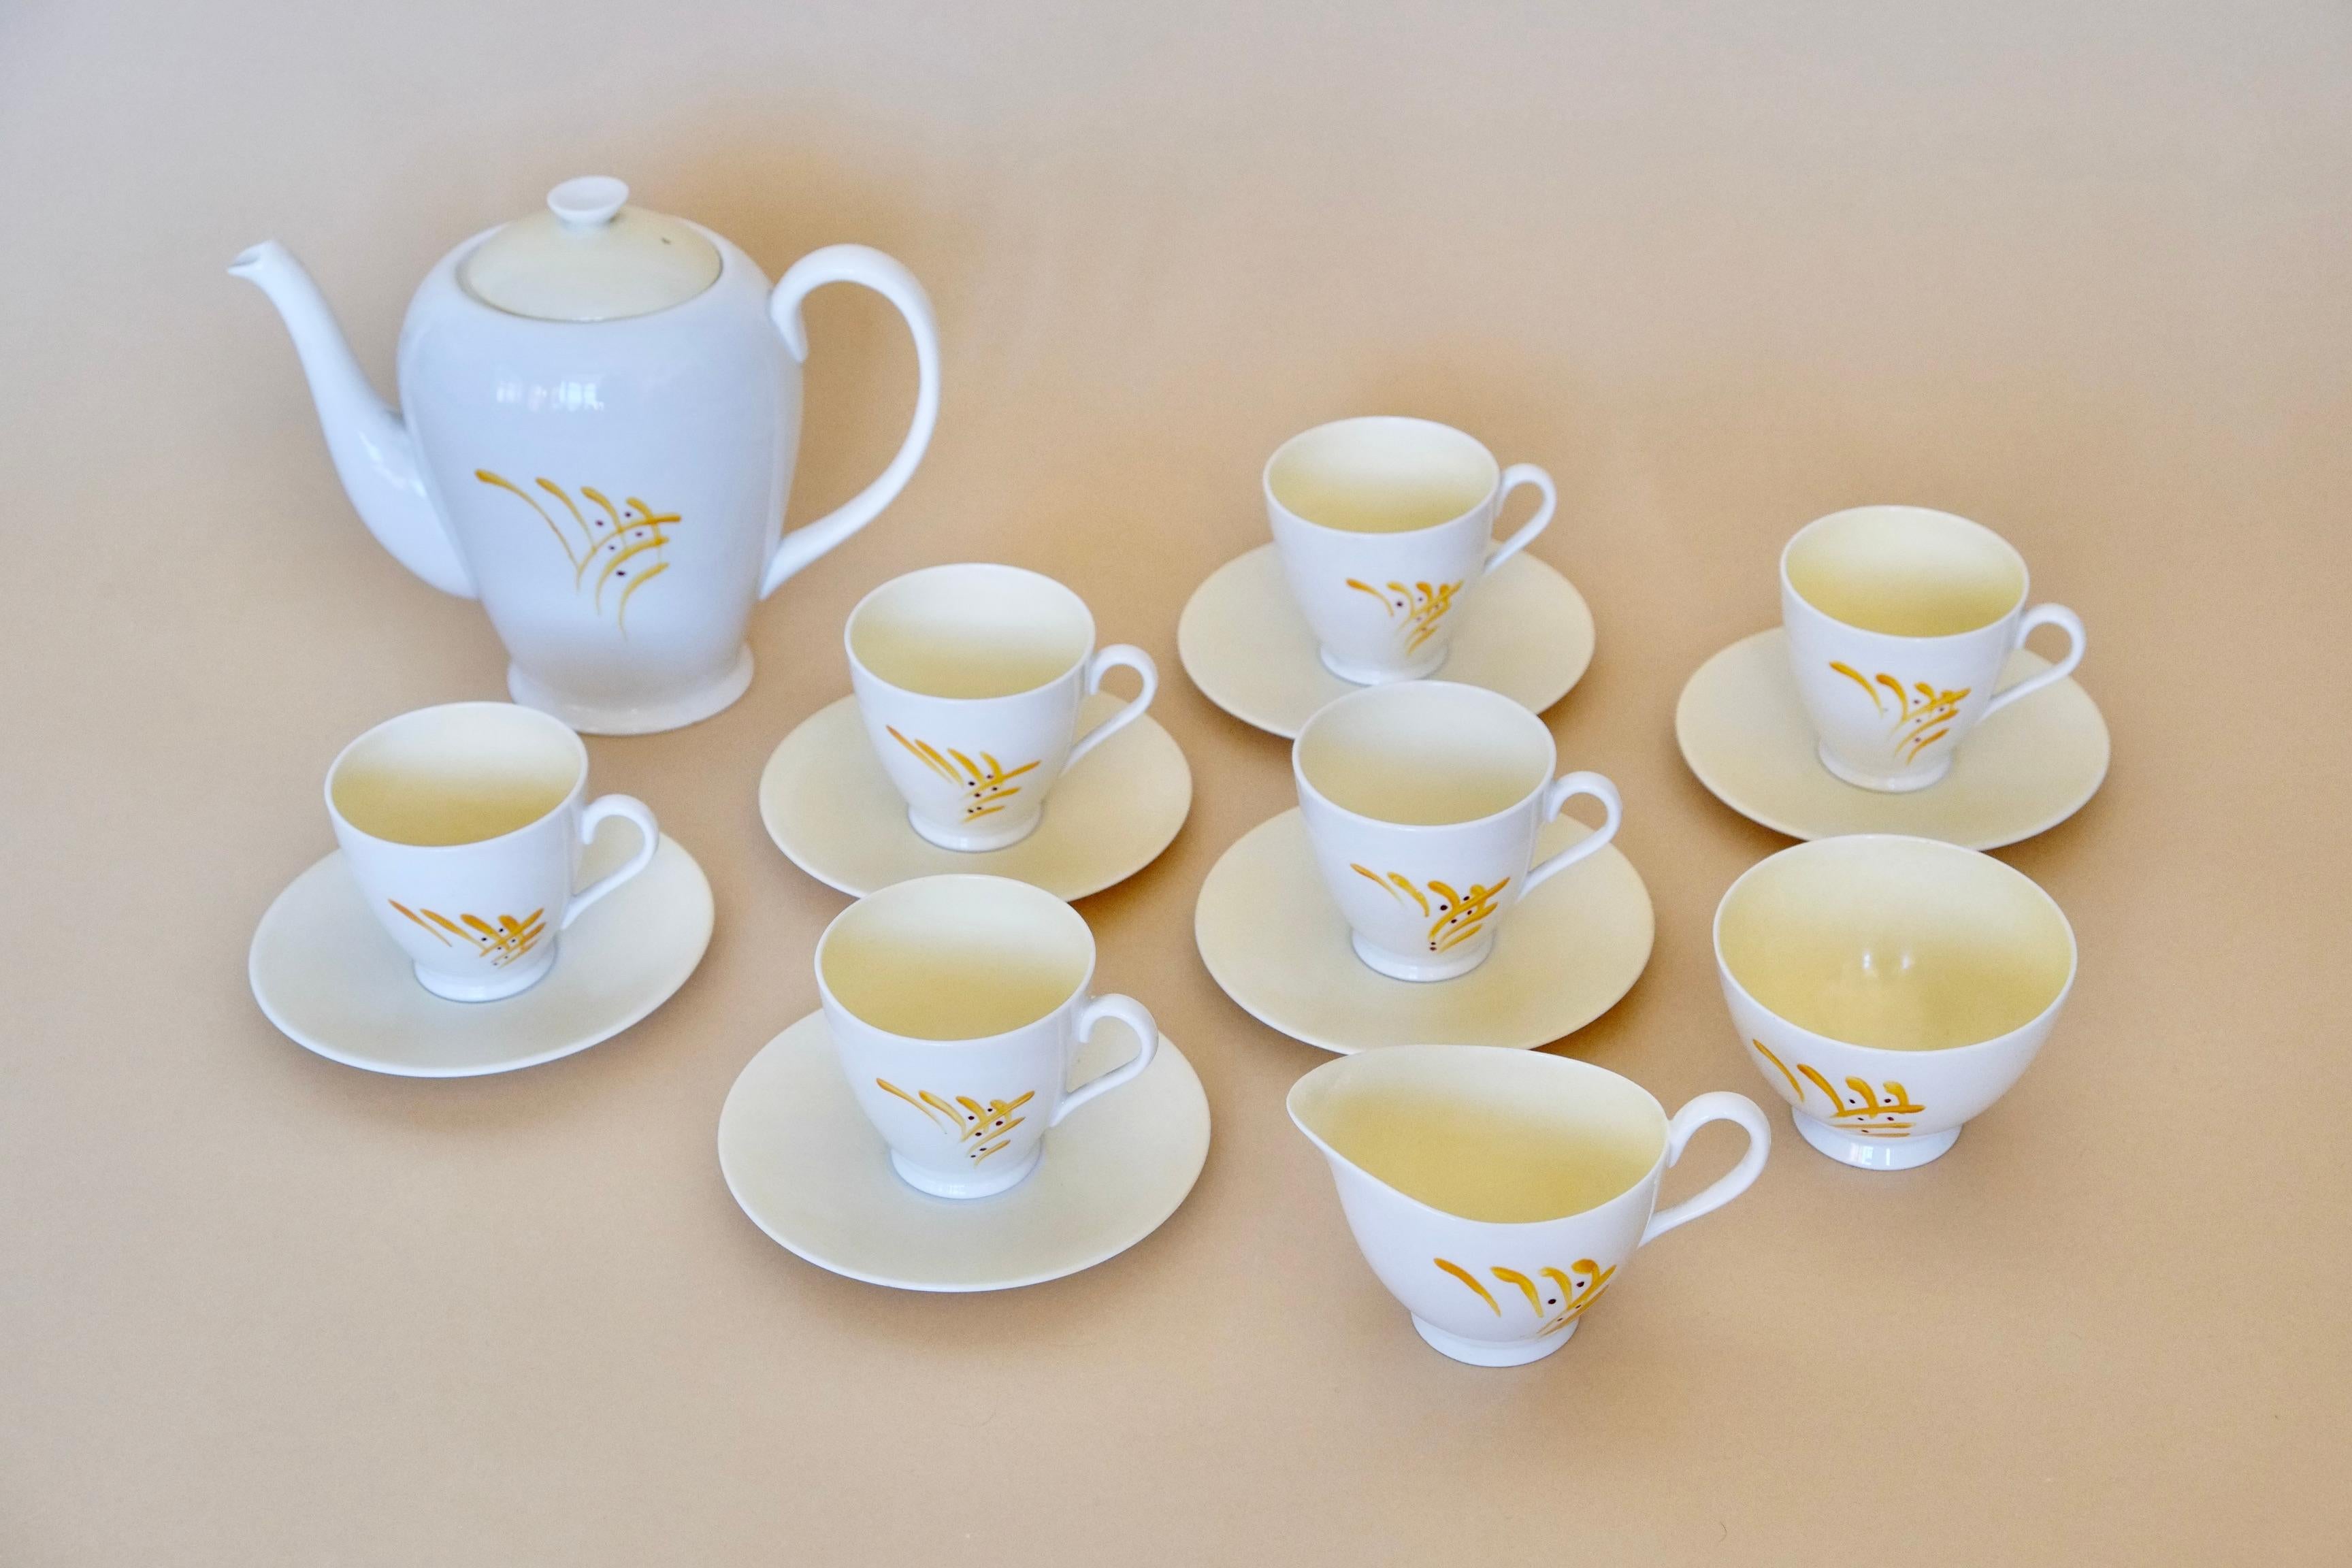 A beautiful midcentury English tea set by Tuscan Fine Bone China
Made in England

This tea set has a beautiful handpainted design with organic brushstrokes in deep yellow and a crisp white ground. The templates, lids and interior is glazed with the